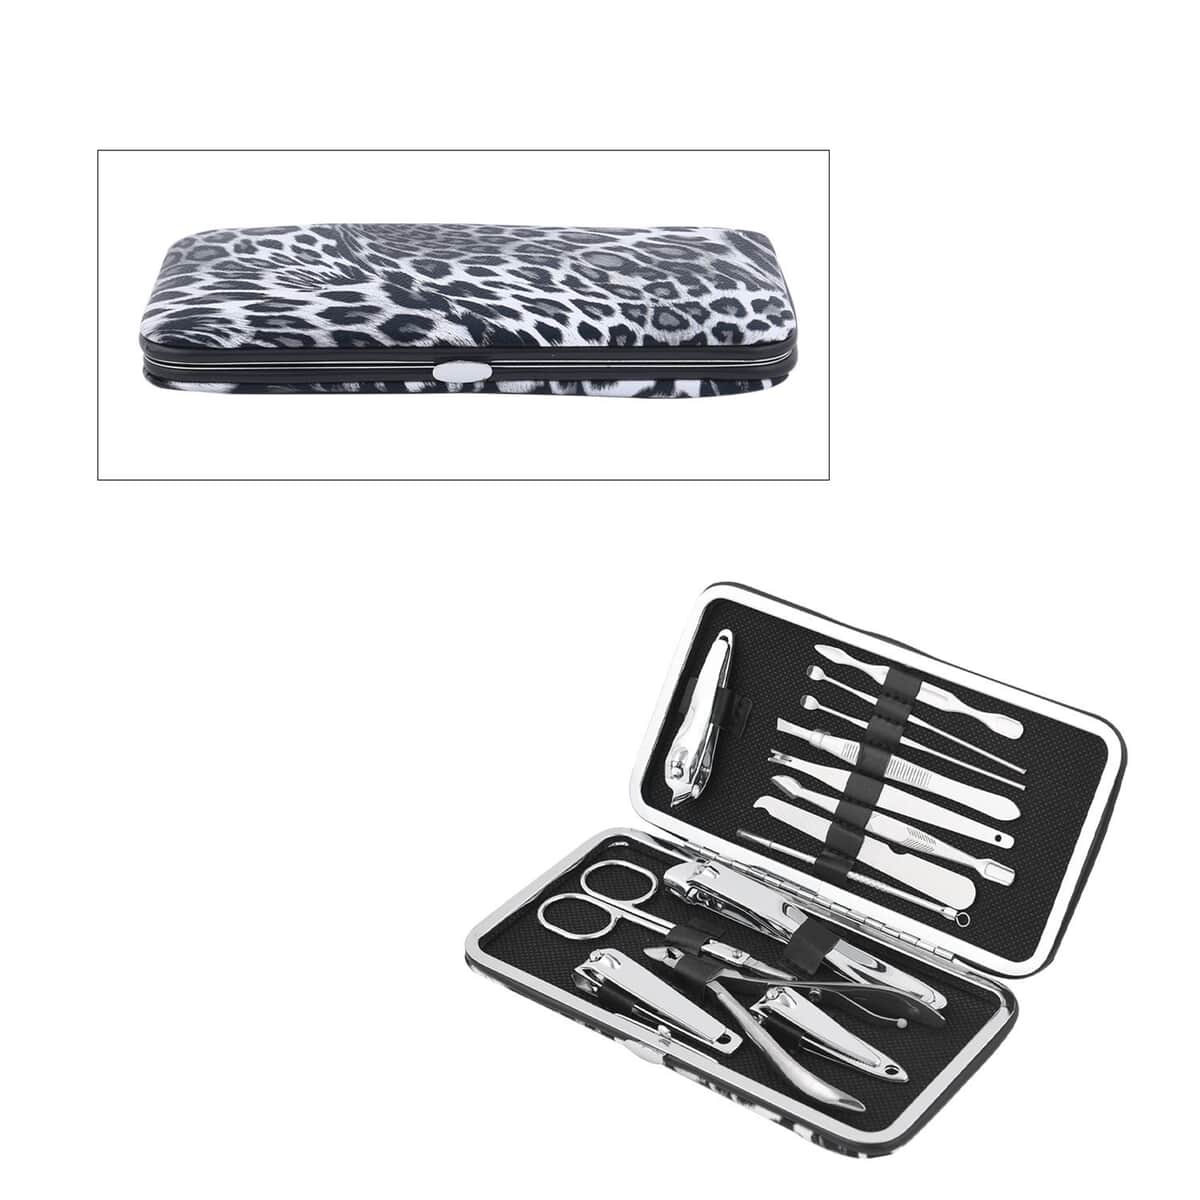 14 Piece Stainless Steel Manicure Grooming Kit in Black Leopard Print Faux Leather Case image number 0